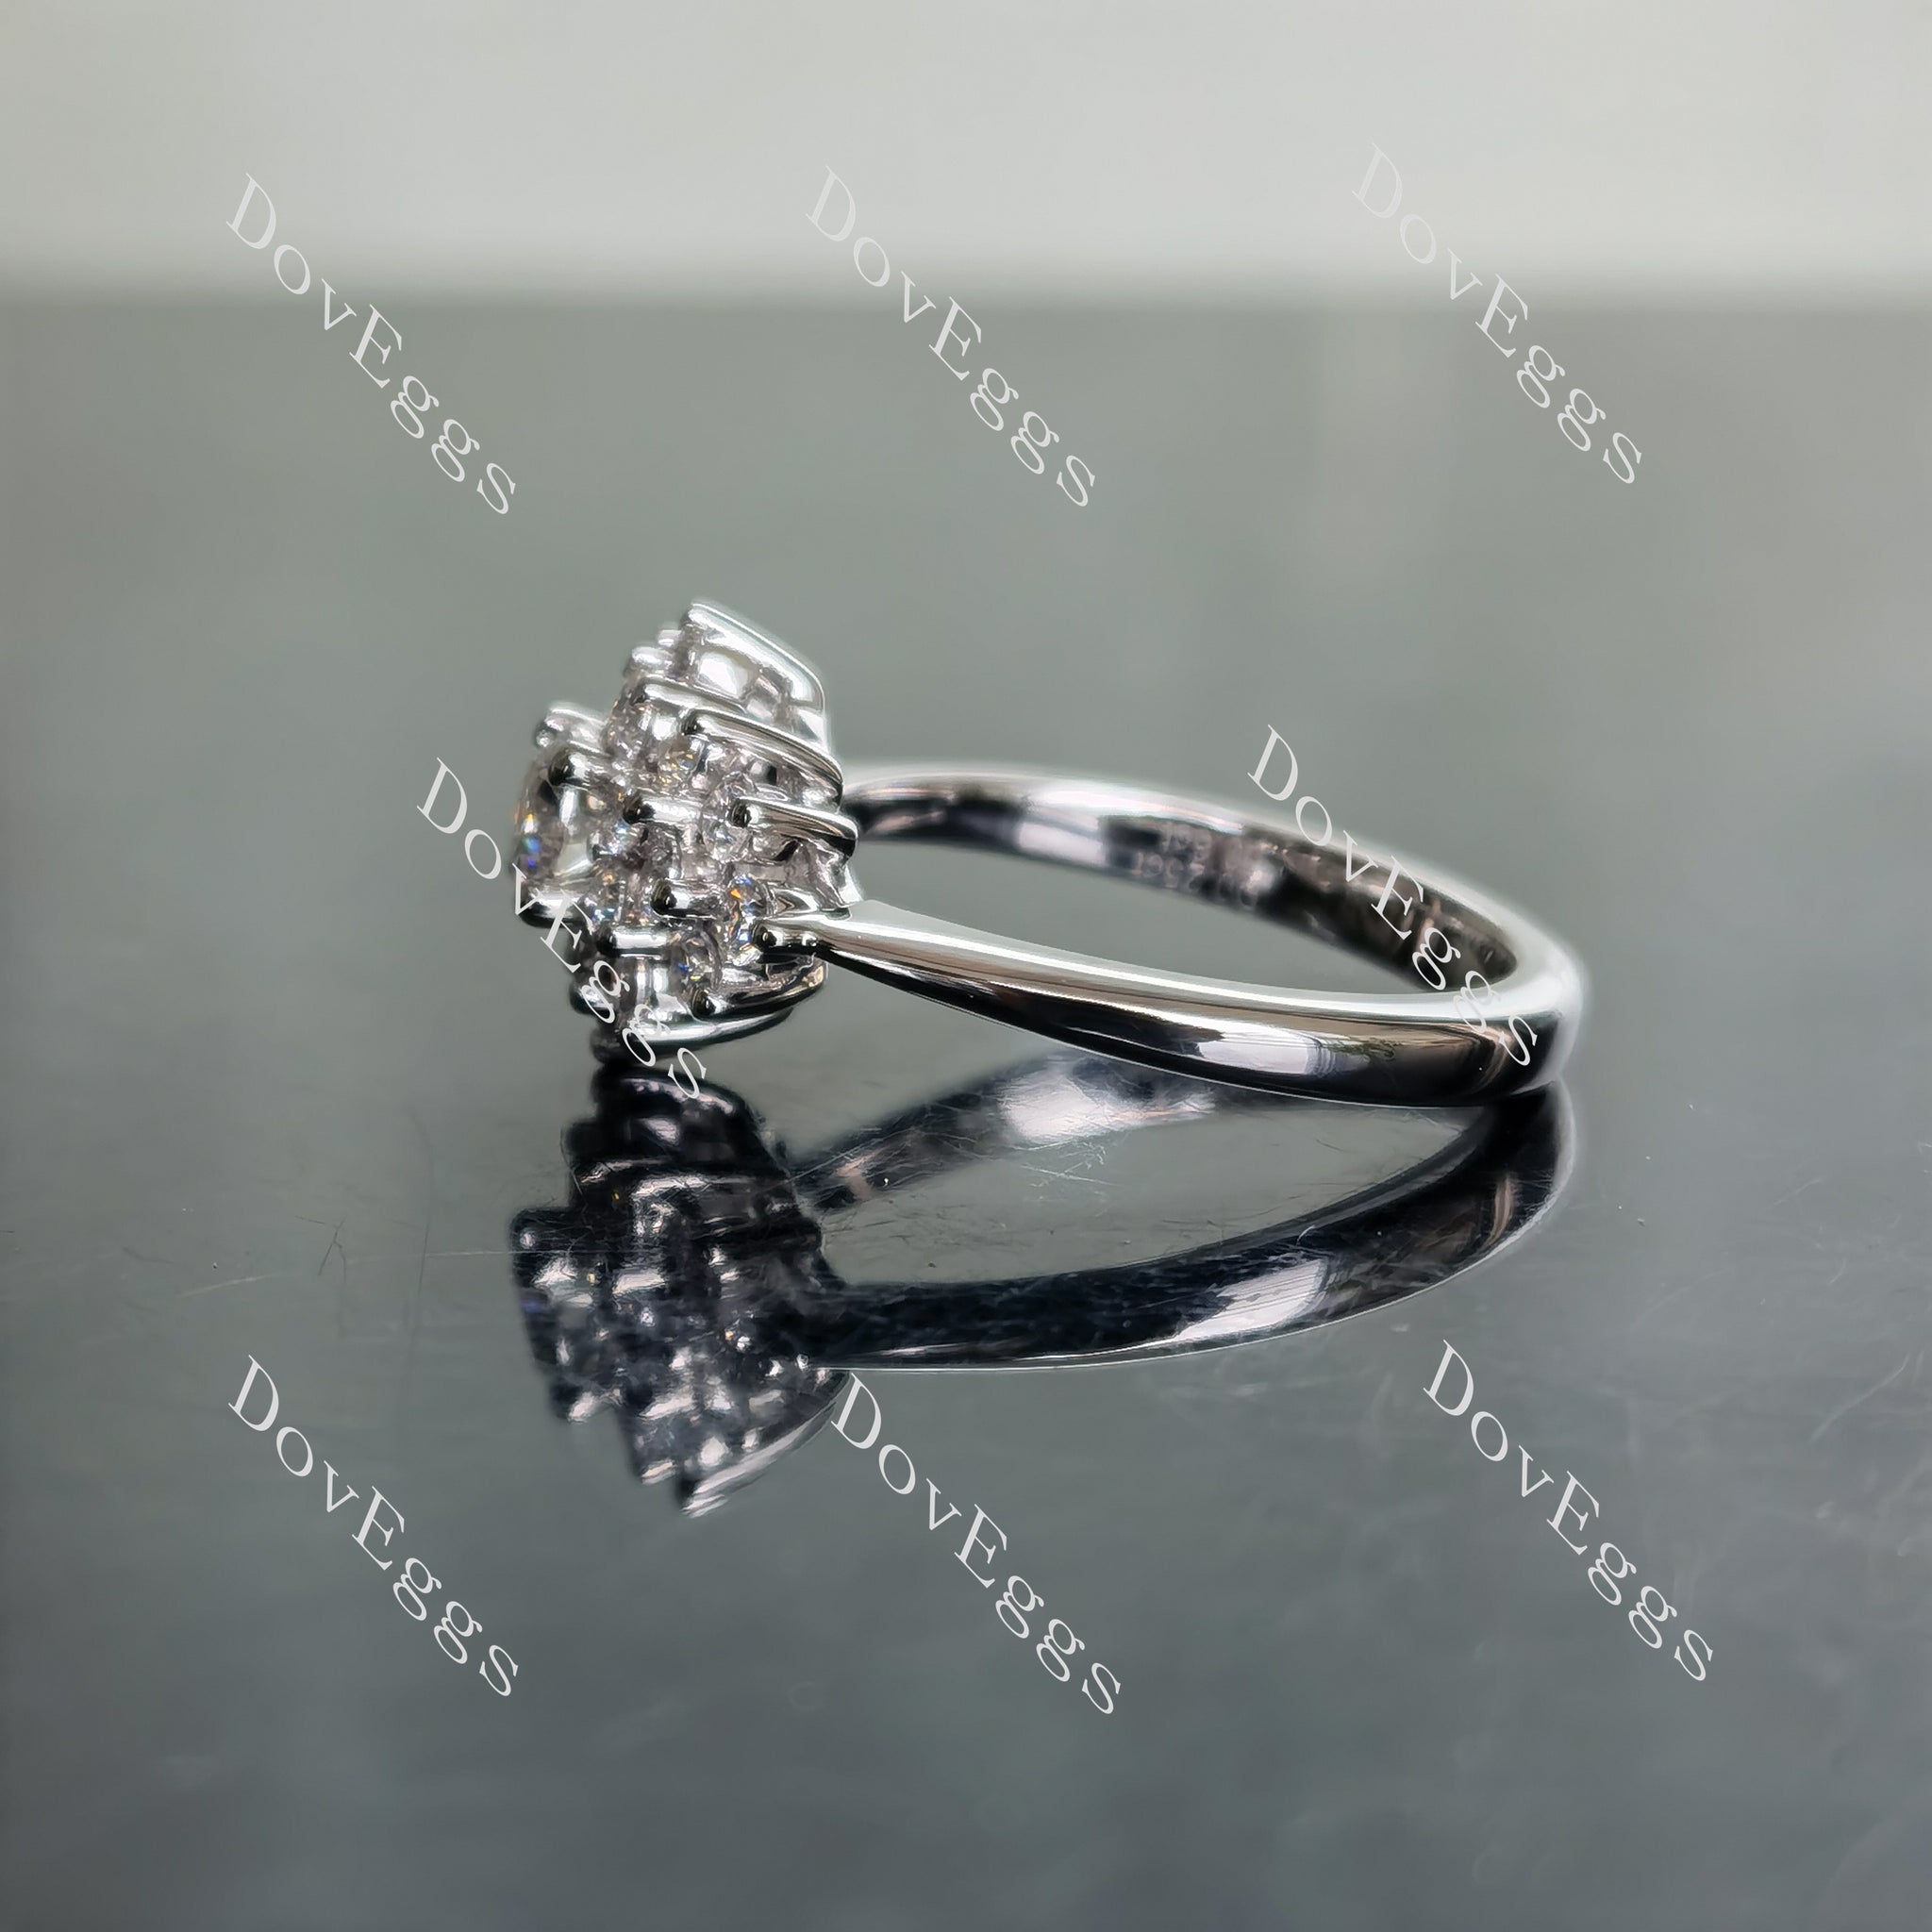 DovEggs round floral halo moissanite engagement ring